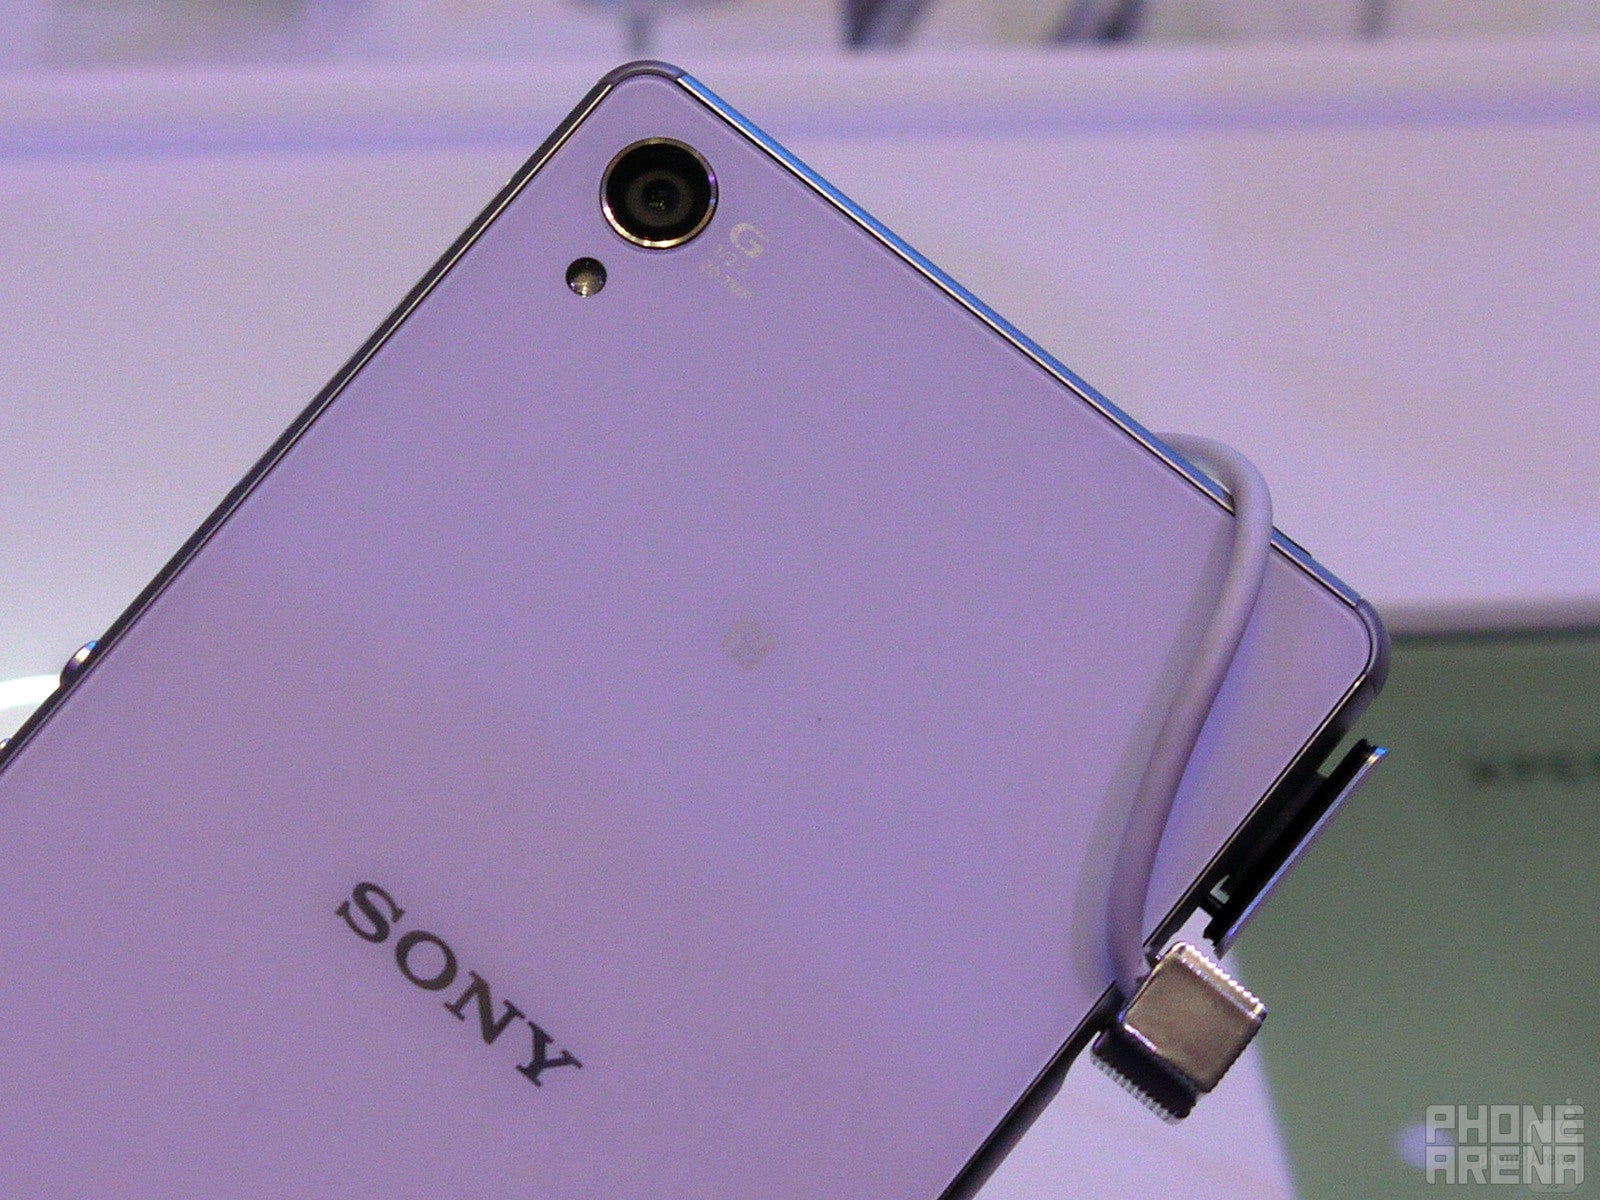 The 20.7MP camera on the Xperia Z3 - Sony Xperia Z3 hands-on: thinner, faster, bolder